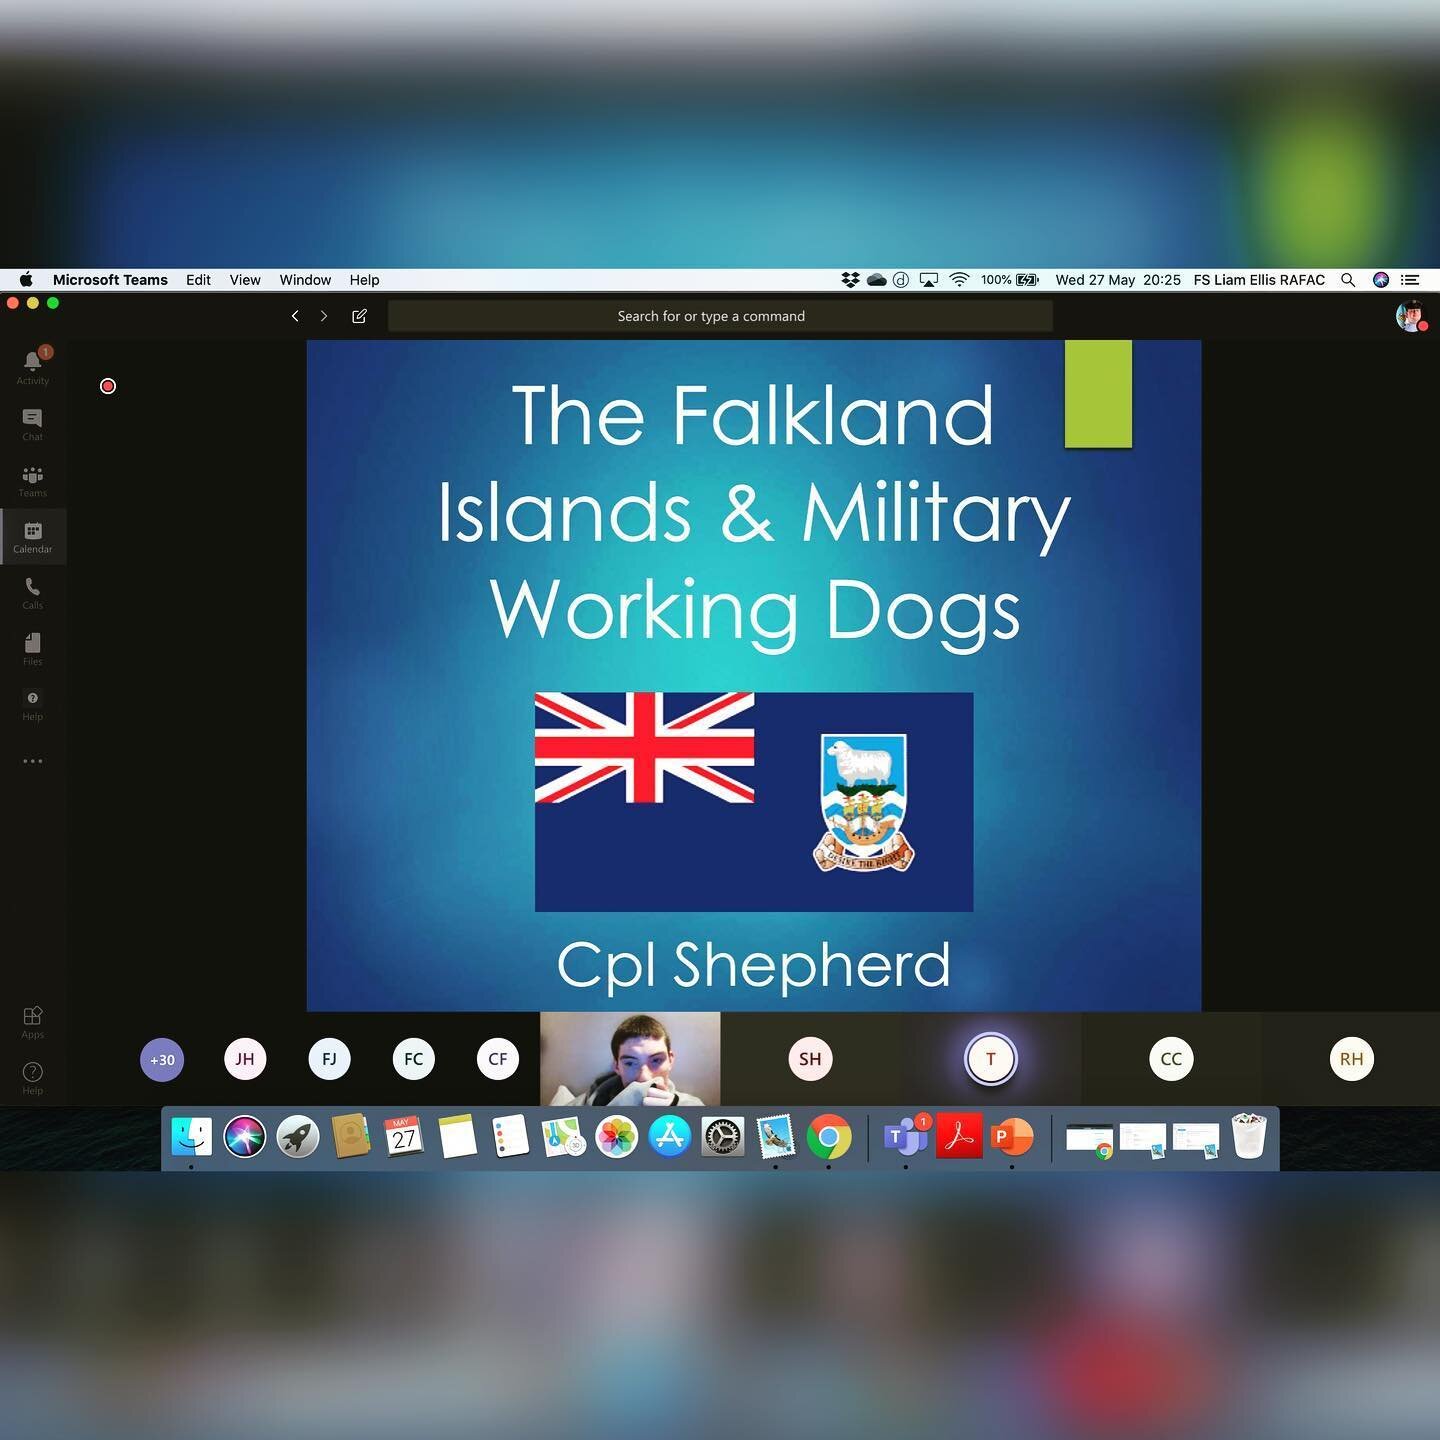 We were treated to an engaging chat from our Service Instructor - Cpl Shepherd - on Wednesday who told us all about his recent deployment to the Falkland Islands as an @RoyalAirForcePolice Dog Handler as well as a brief history of the Islands 🇫🇰 Th